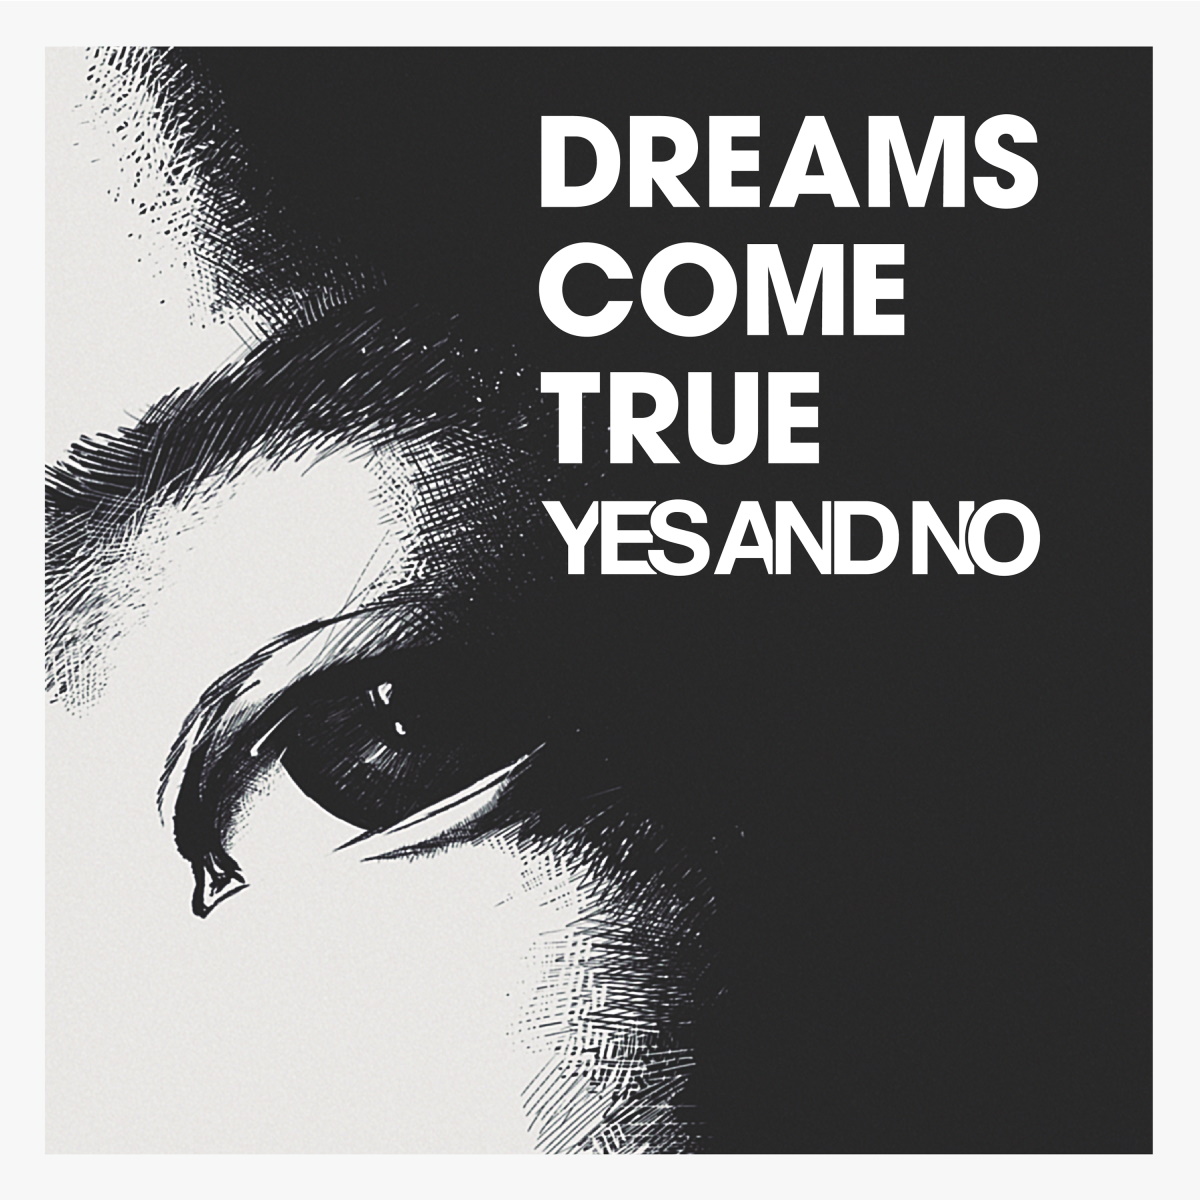 『DREAMS COME TRUE - YES AND NO』収録の『YES AND NO/G』ジャケット